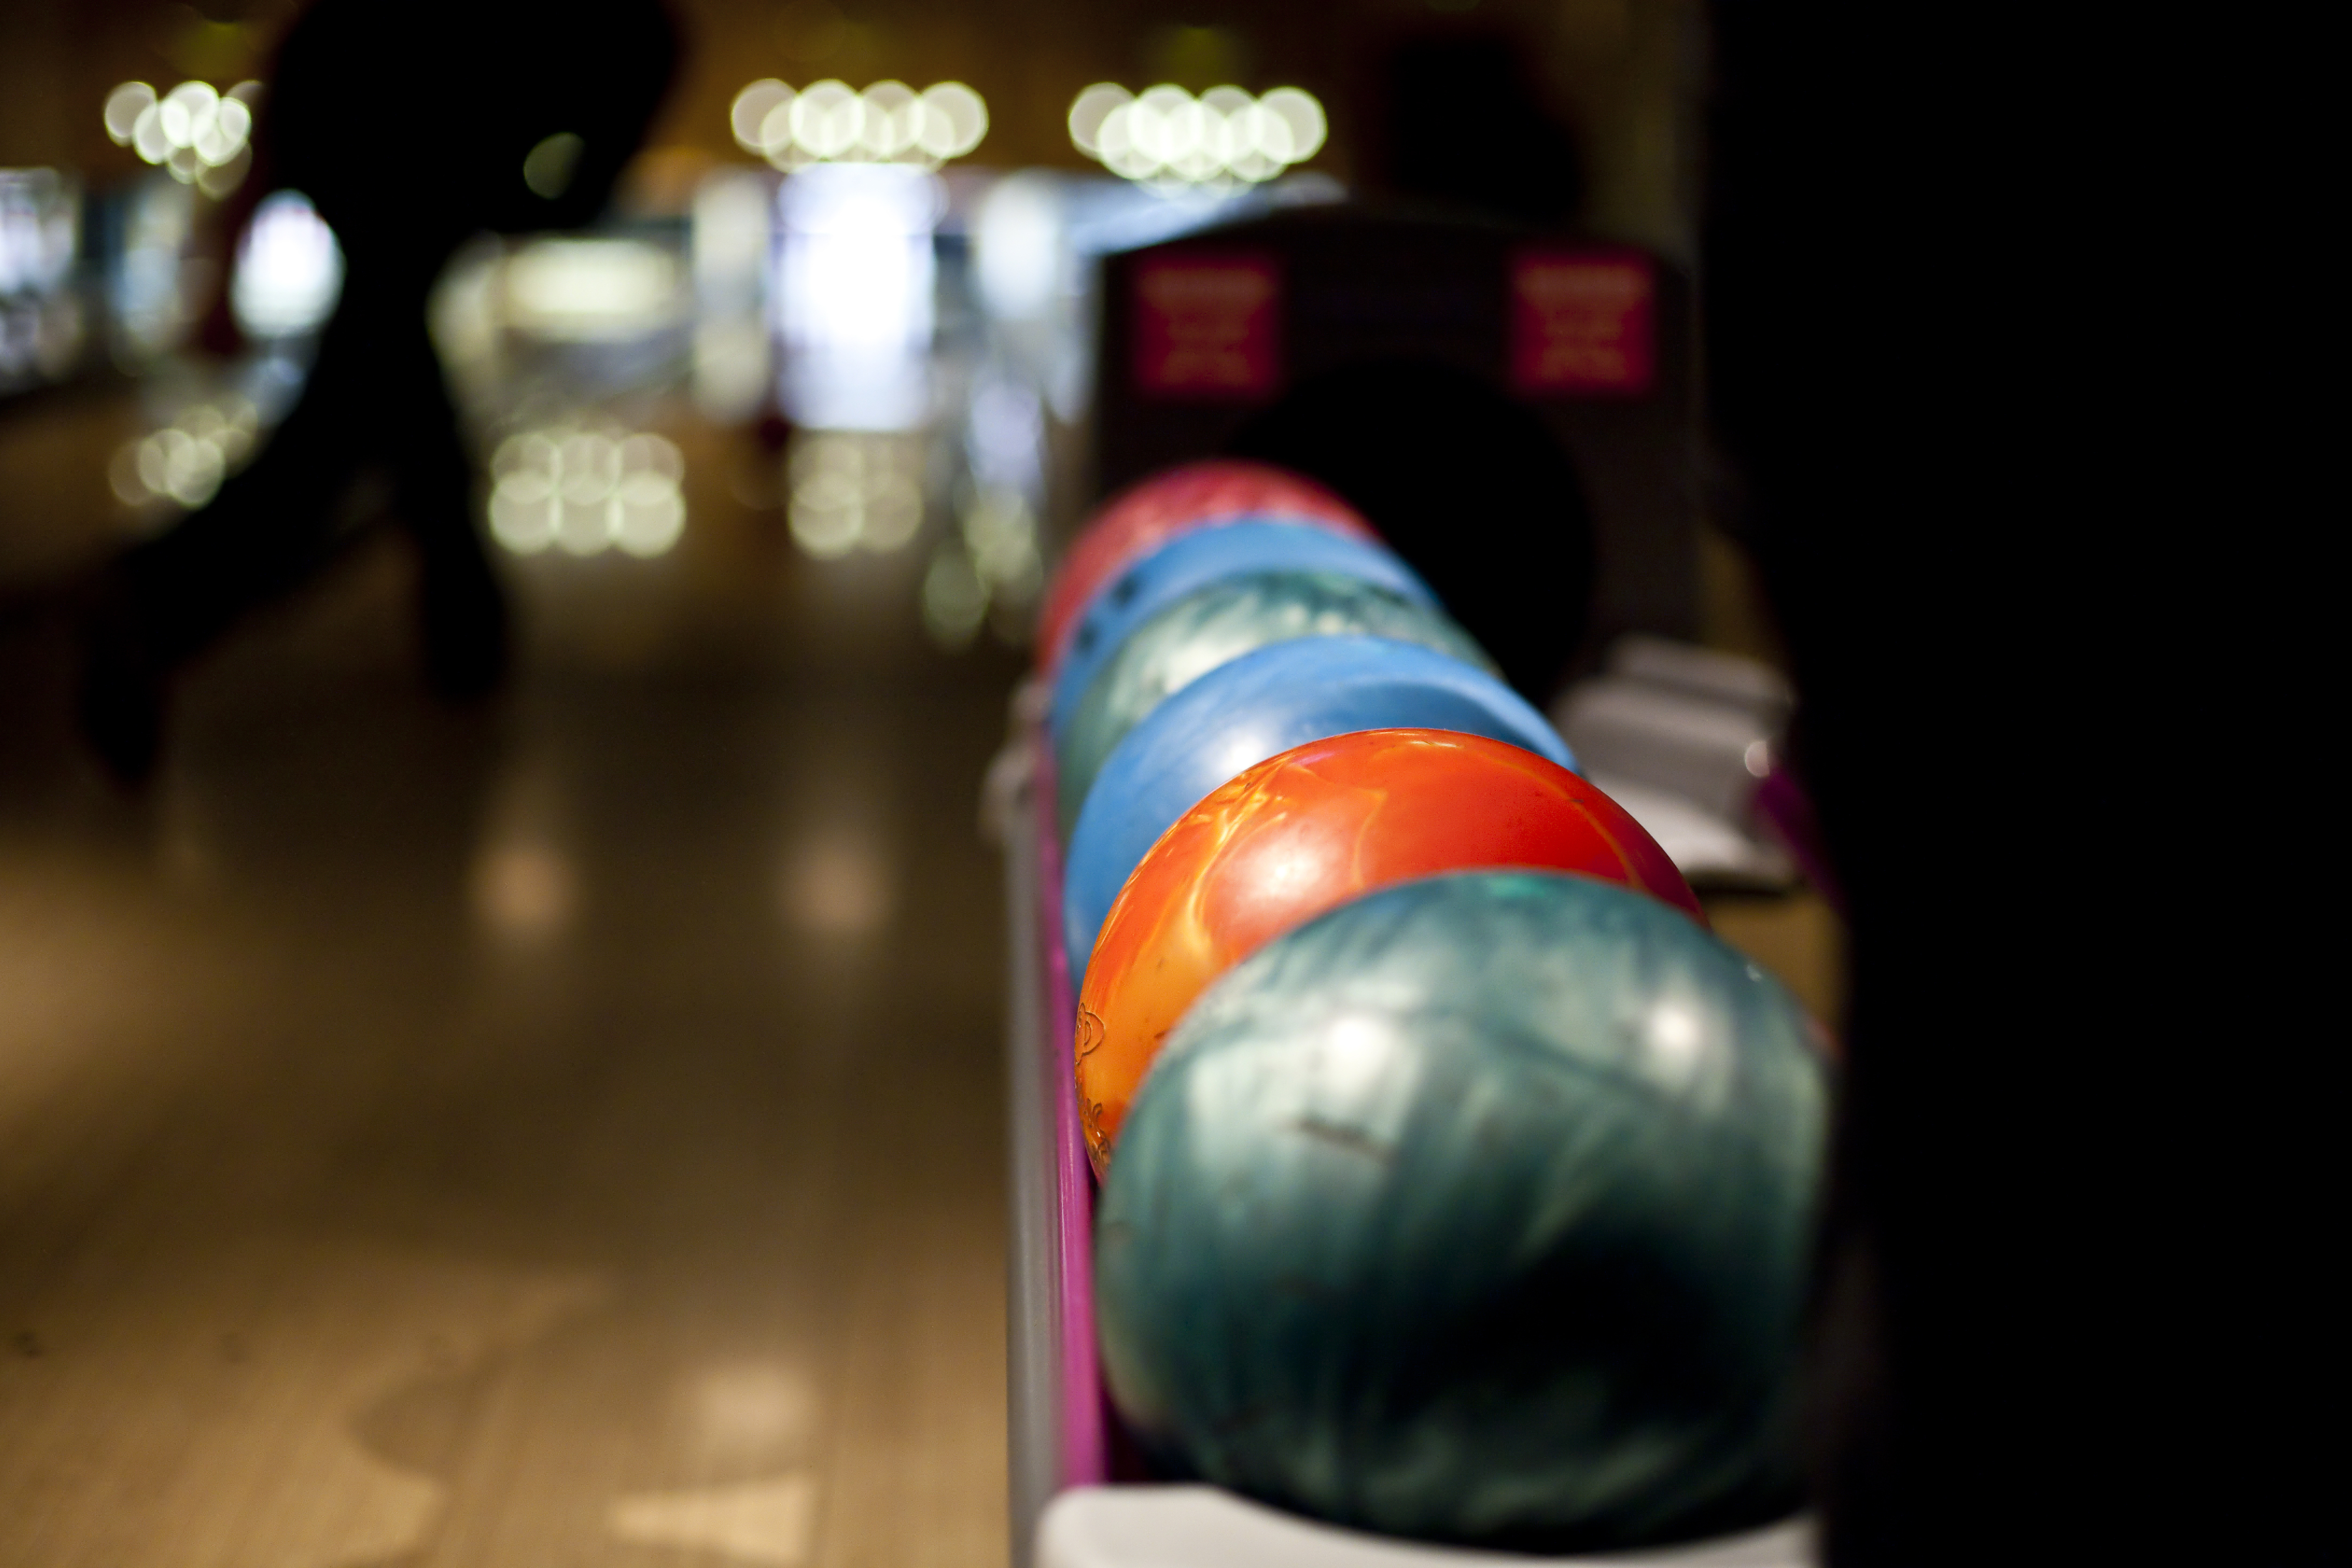 A row of bowling balls at a bowling alley.